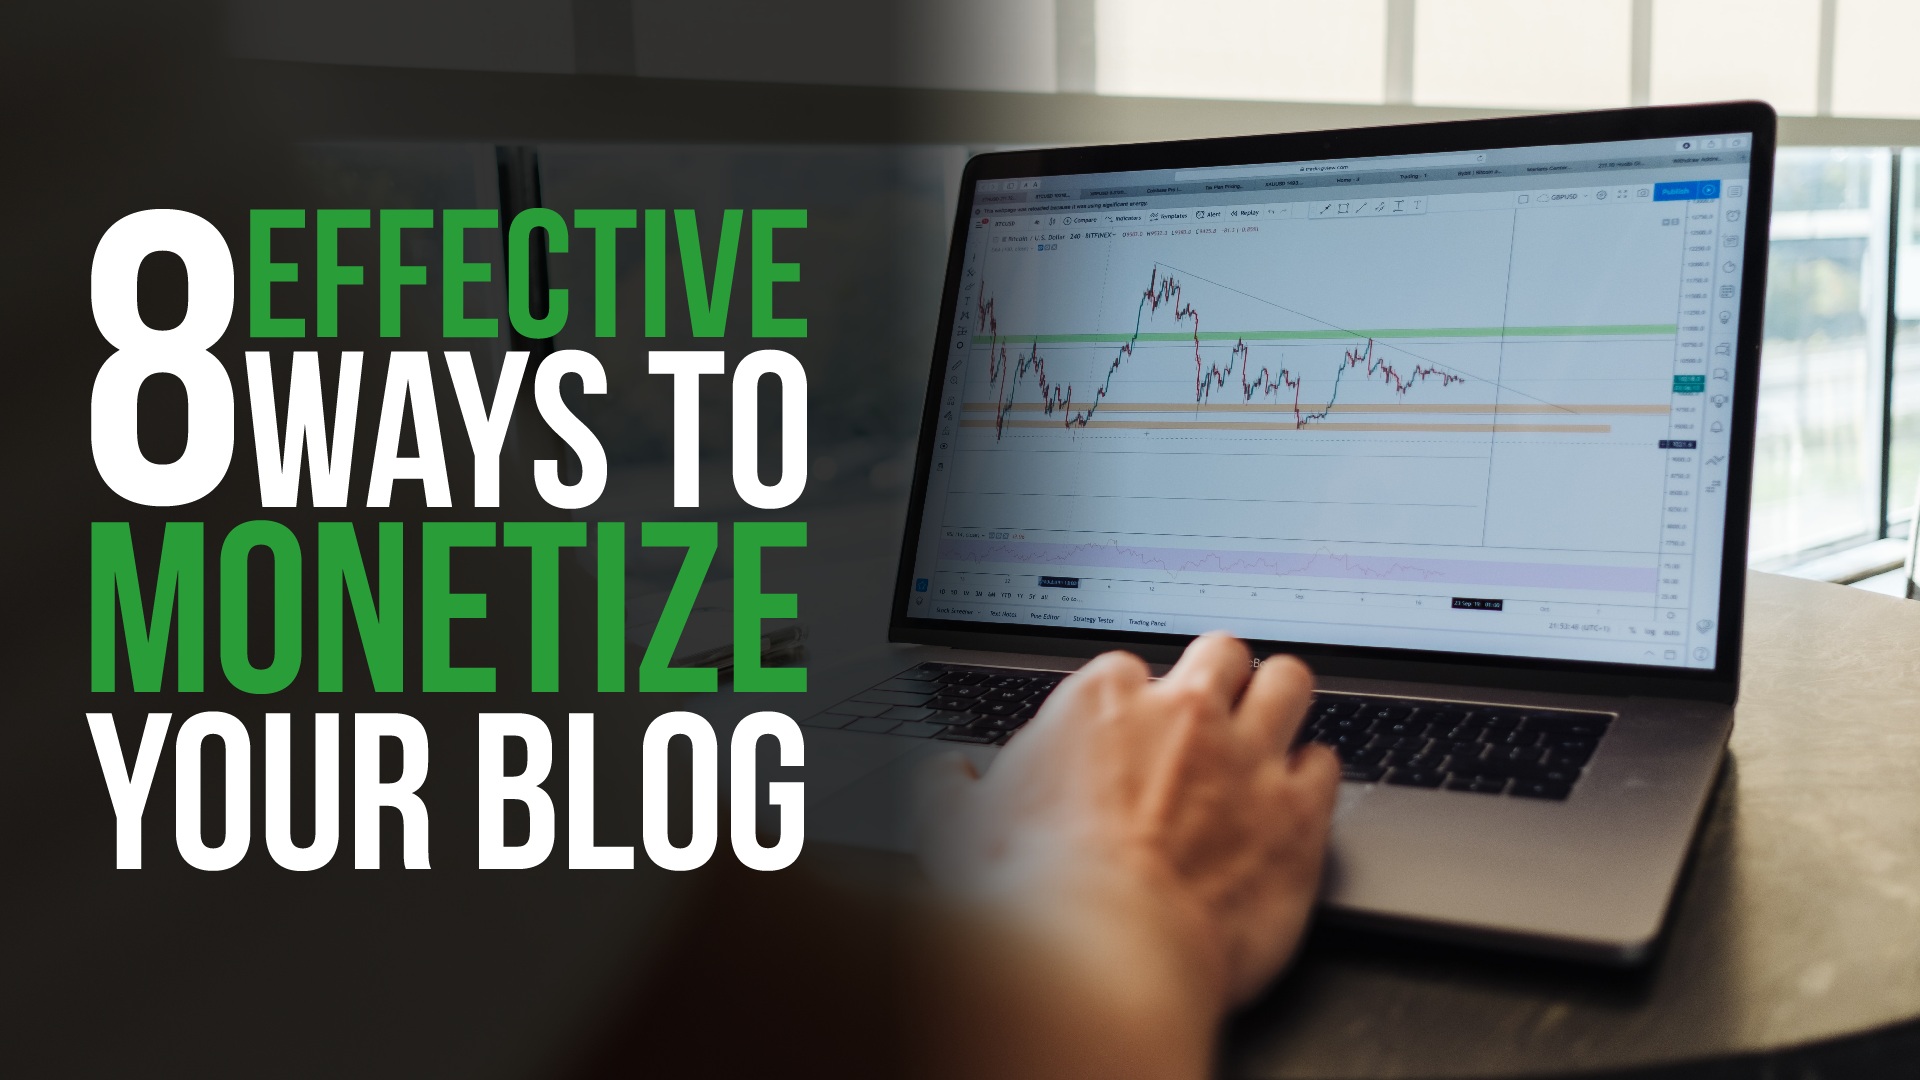 8 Effective Ways to Monetize Your Blog